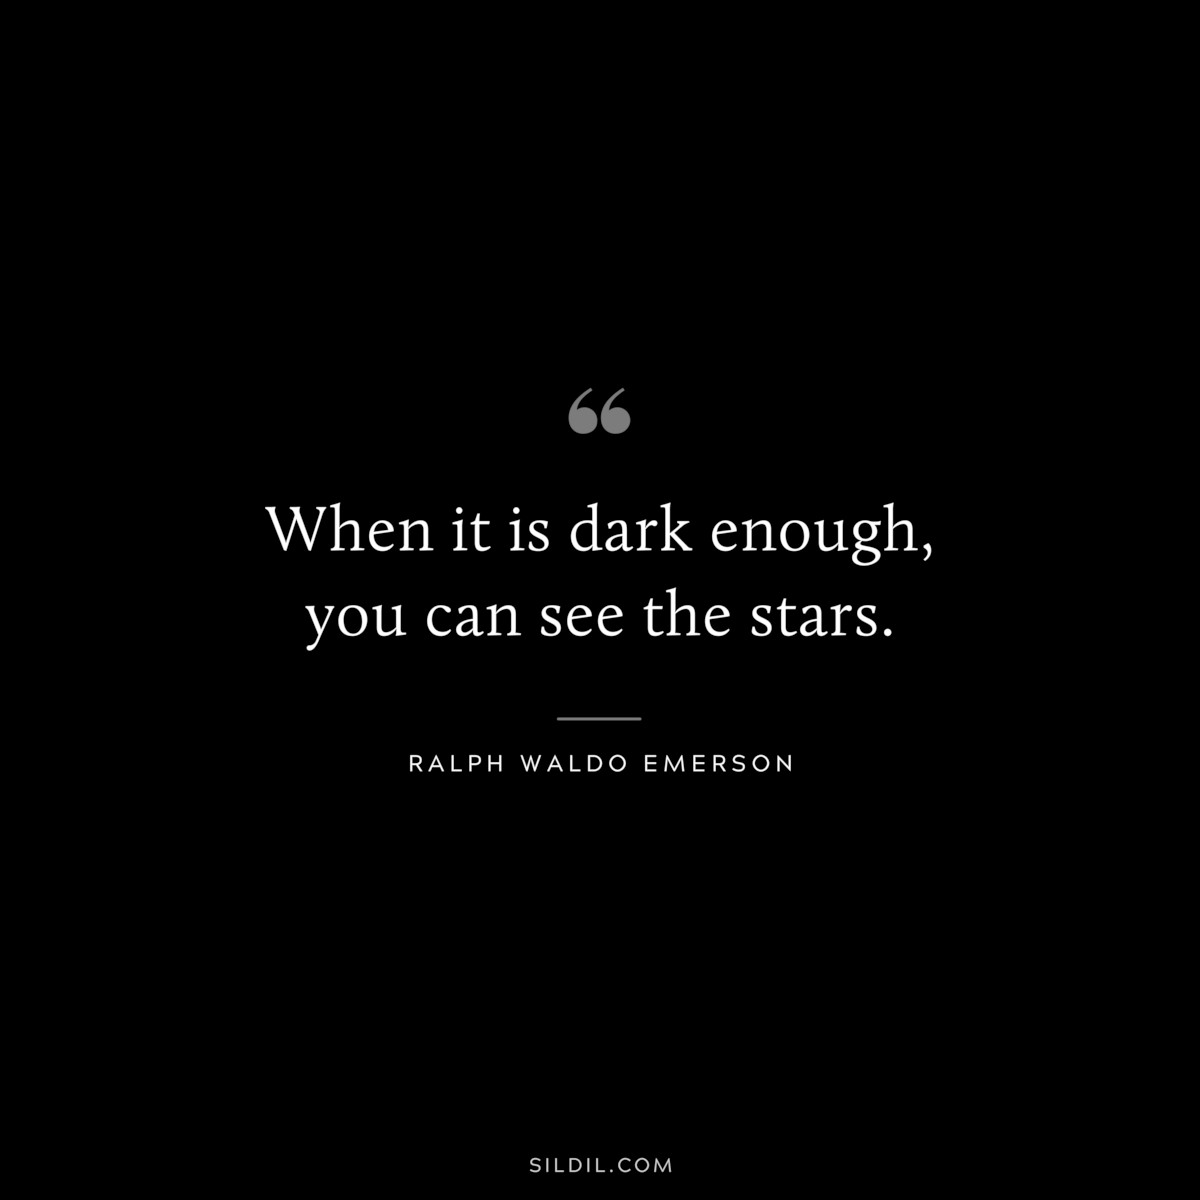 When it is dark enough, you can see the stars. — Ralph Waldo Emerson